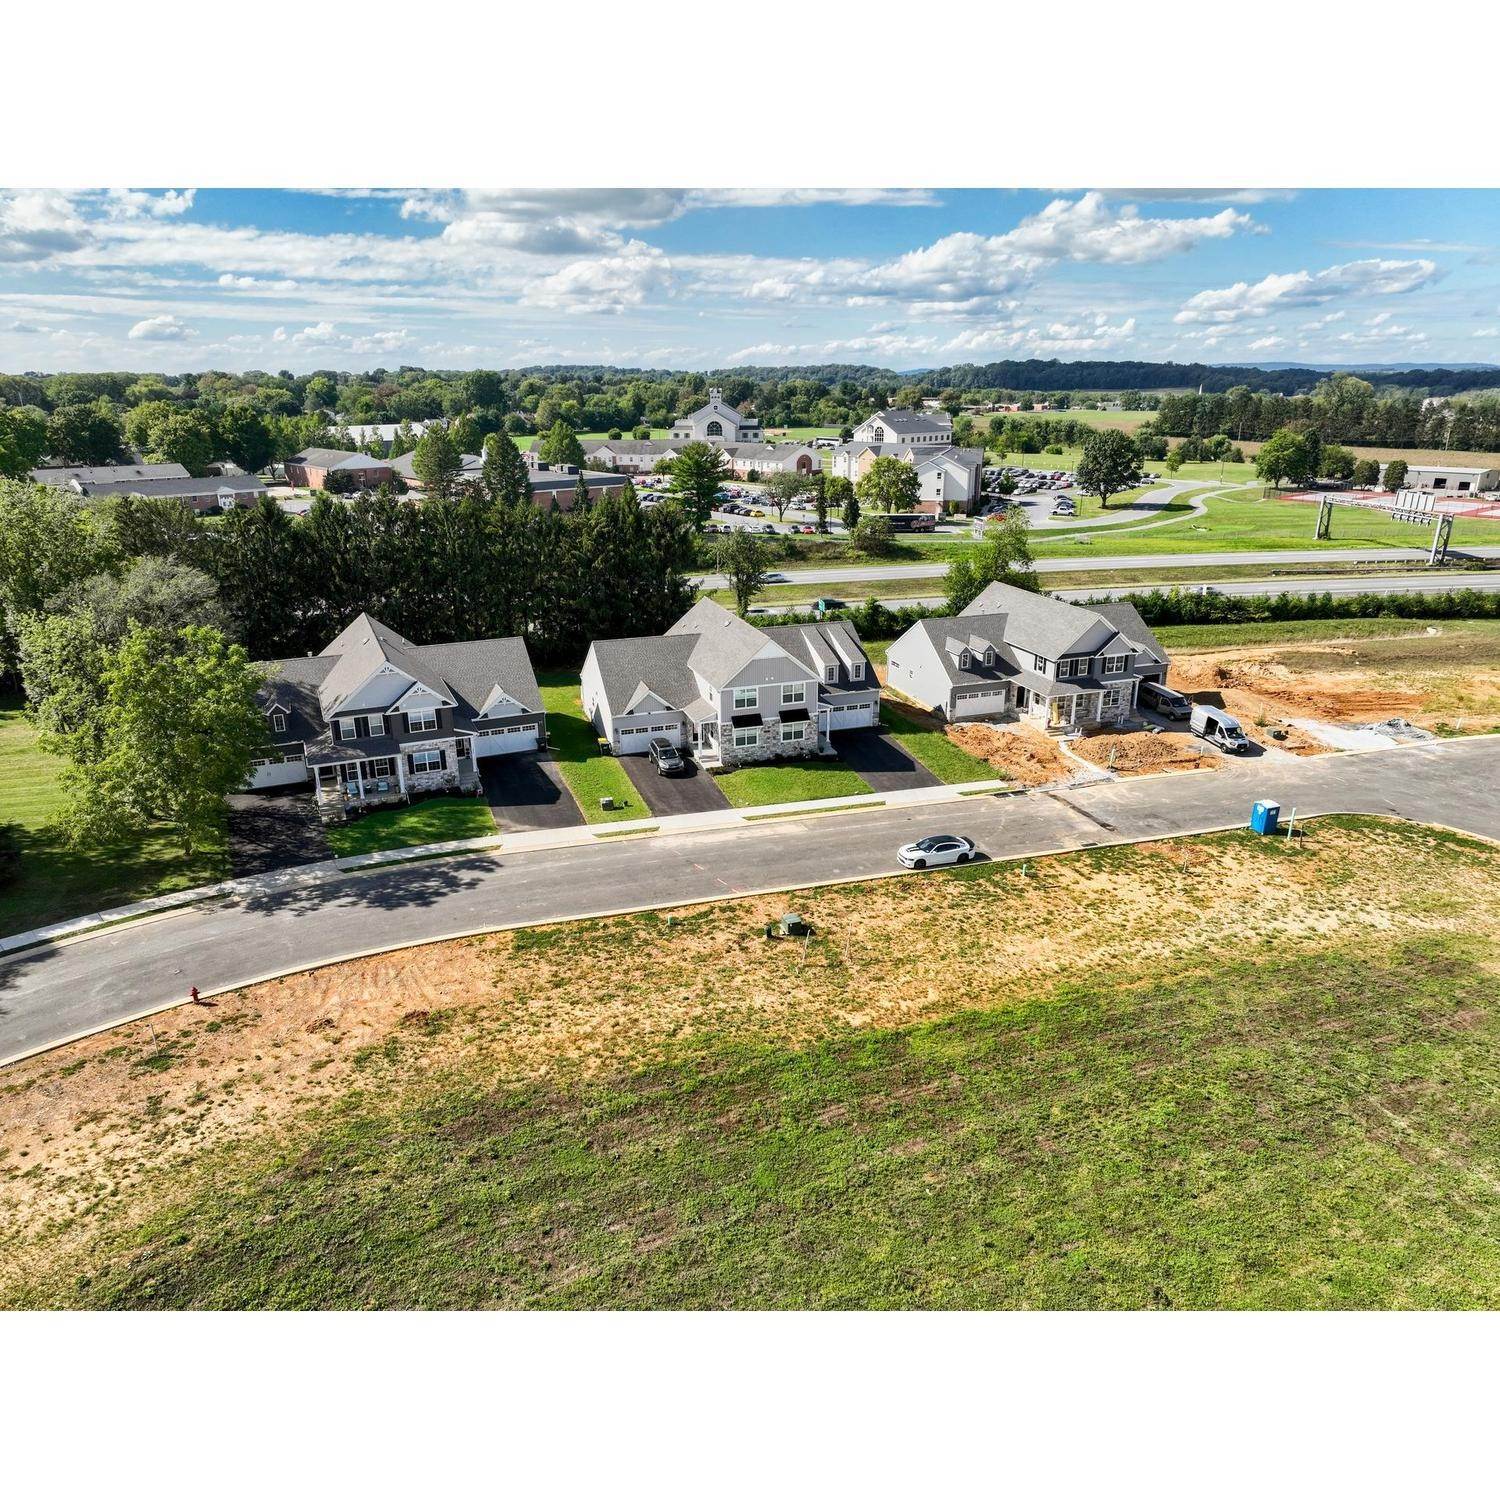 Somerford at Stoner Farm Carriage Homes xây dựng tại 1301 Eden Rd, Lancaster, PA 17601